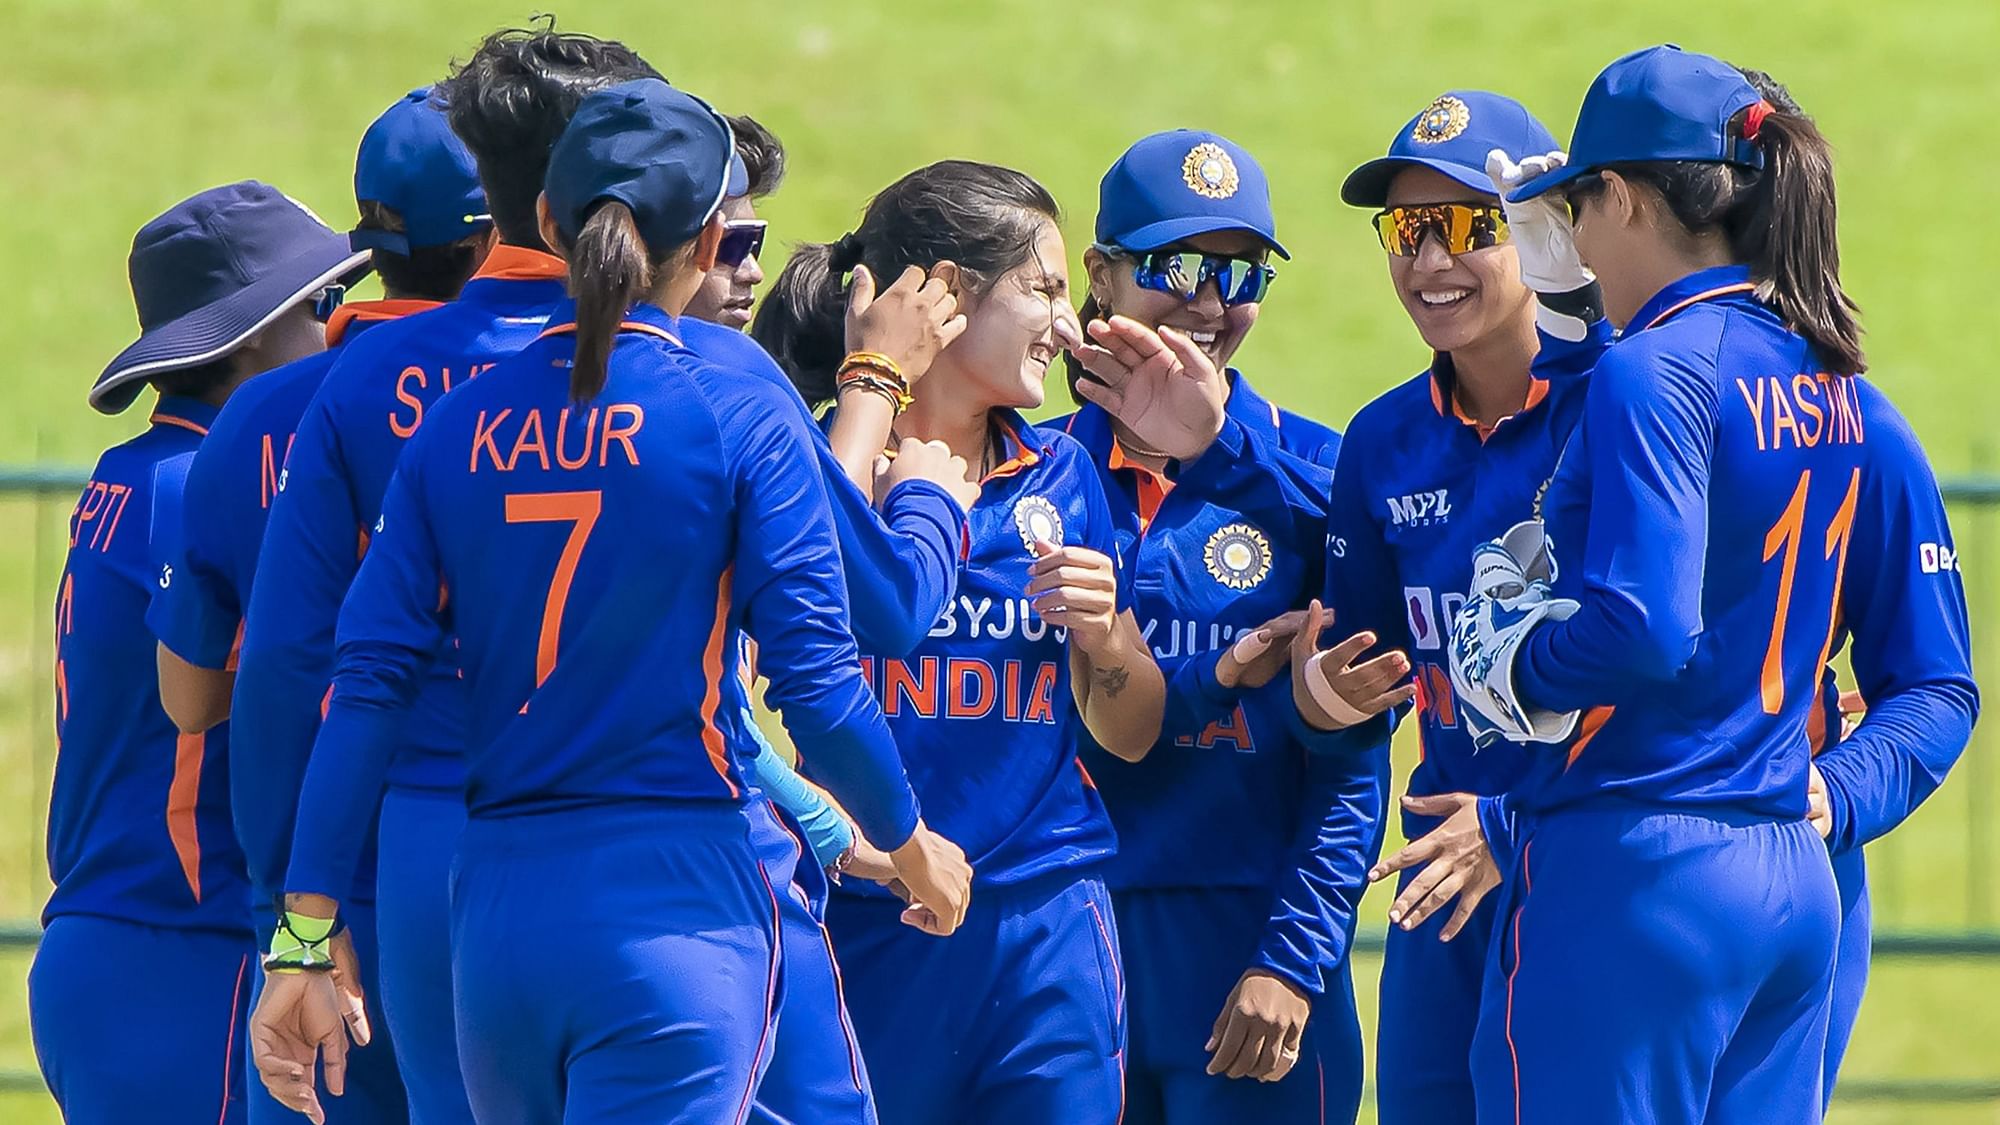 <div class="paragraphs"><p>CWG 2022: The Indian women's cricket team will start their 2022 Commonwealth Games campaign on Friday.</p></div>